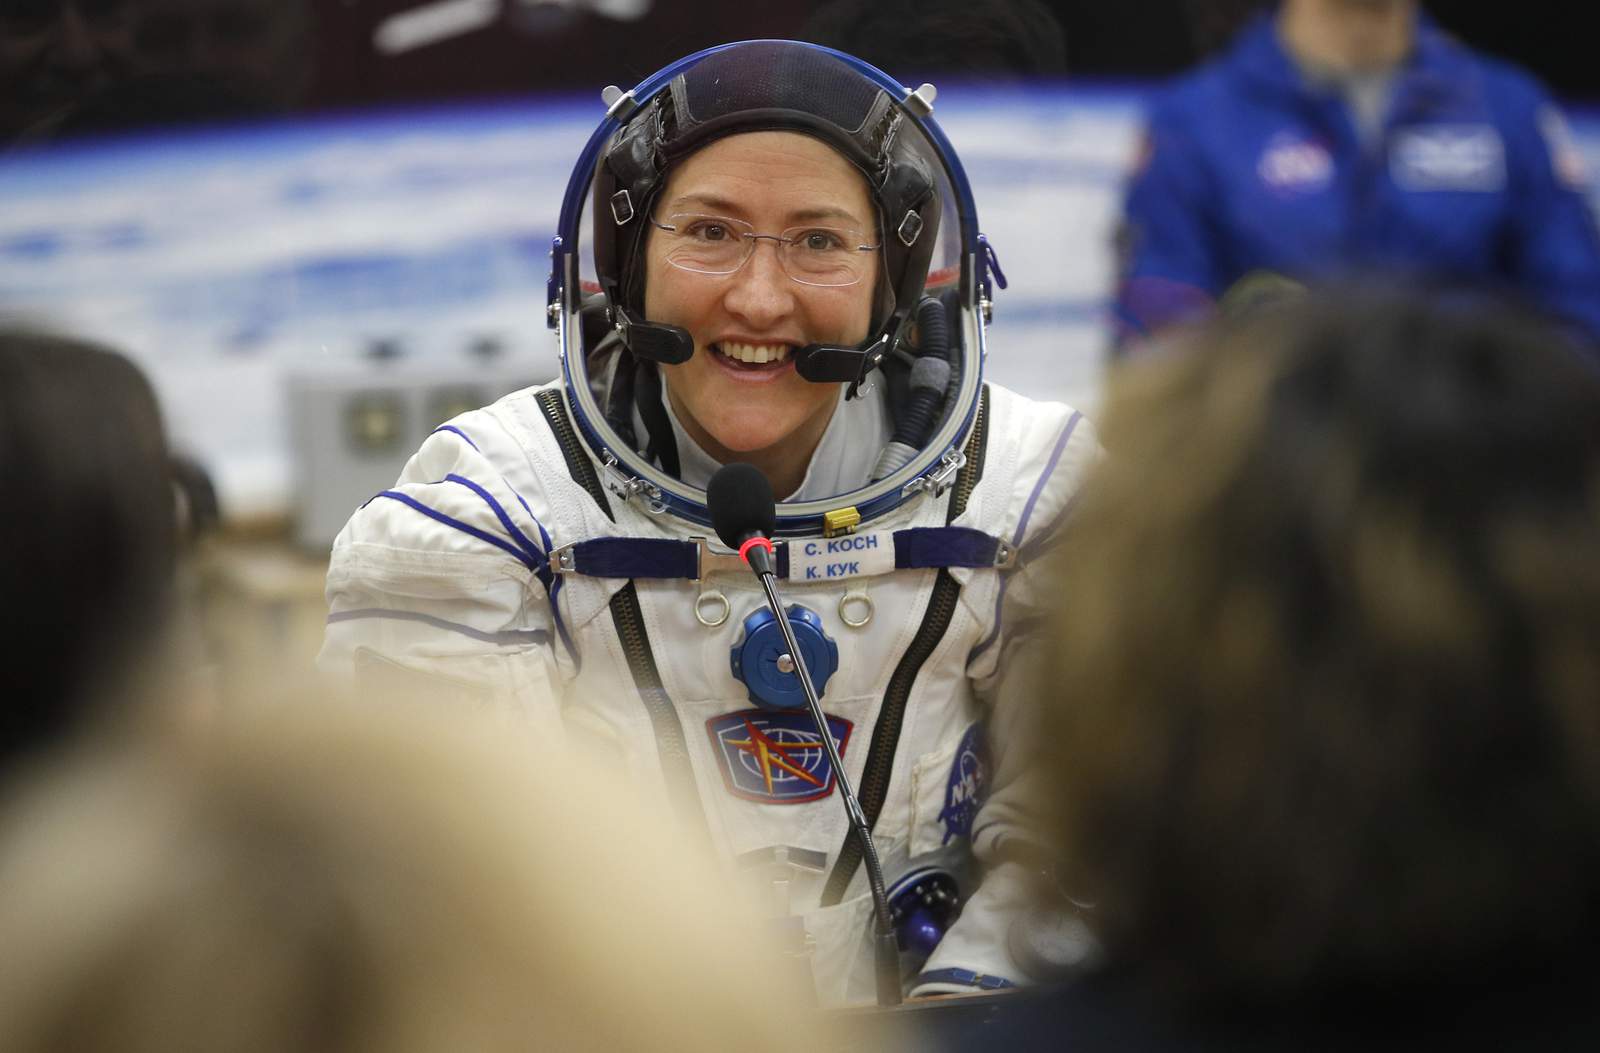 Michigan astronaut reveals what she misses on Earth after record 11 months aloft